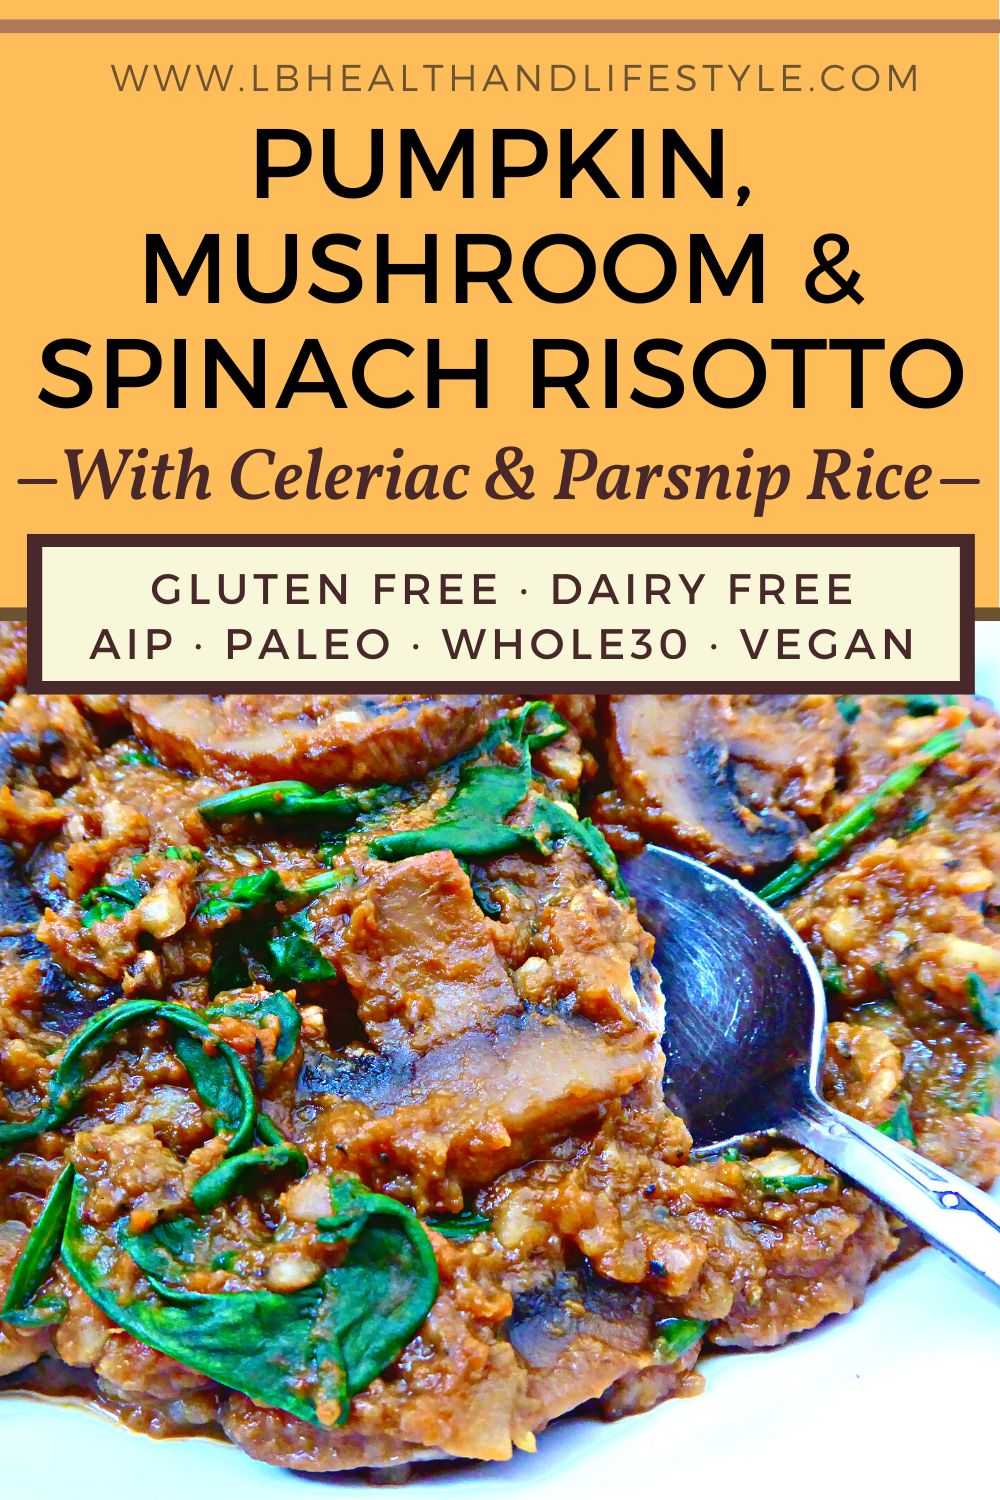 pumpkin mushroom and spinach risotto diet requirements gluten free dairy free aip paleo whole30 vegan